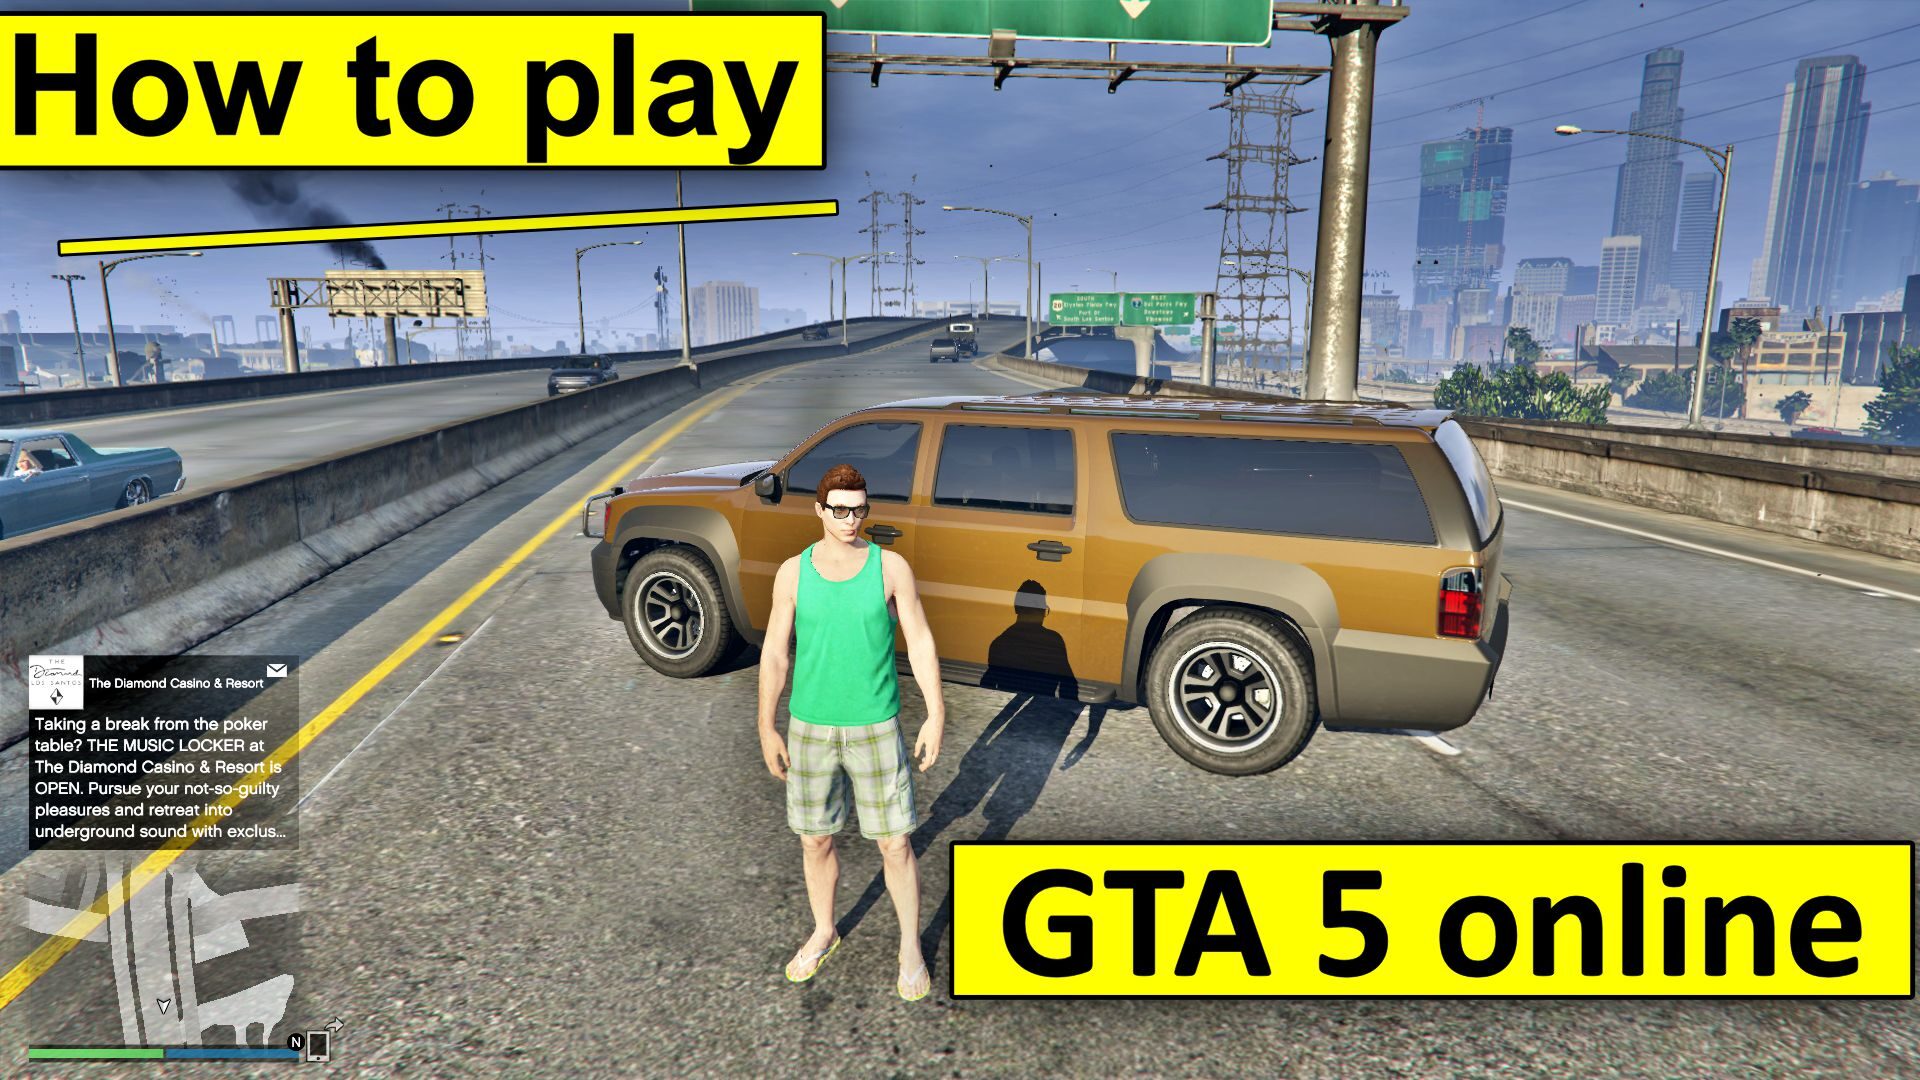 How to Play GTA 5 online, What I have to Do?